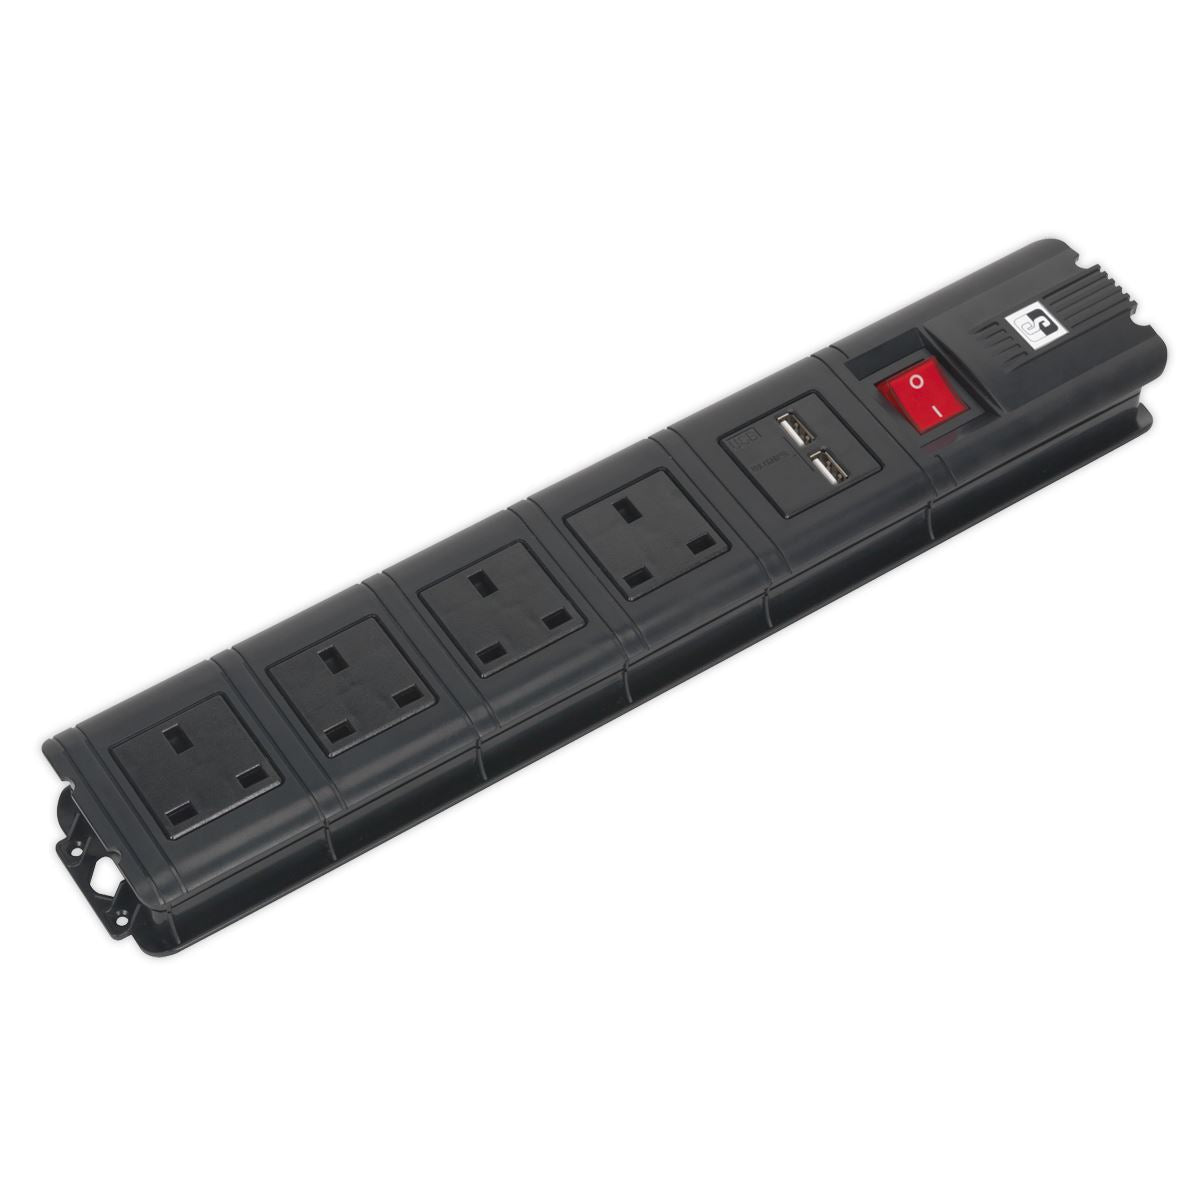 Sealey Extension Lead 2.6m with USB Ports - Black